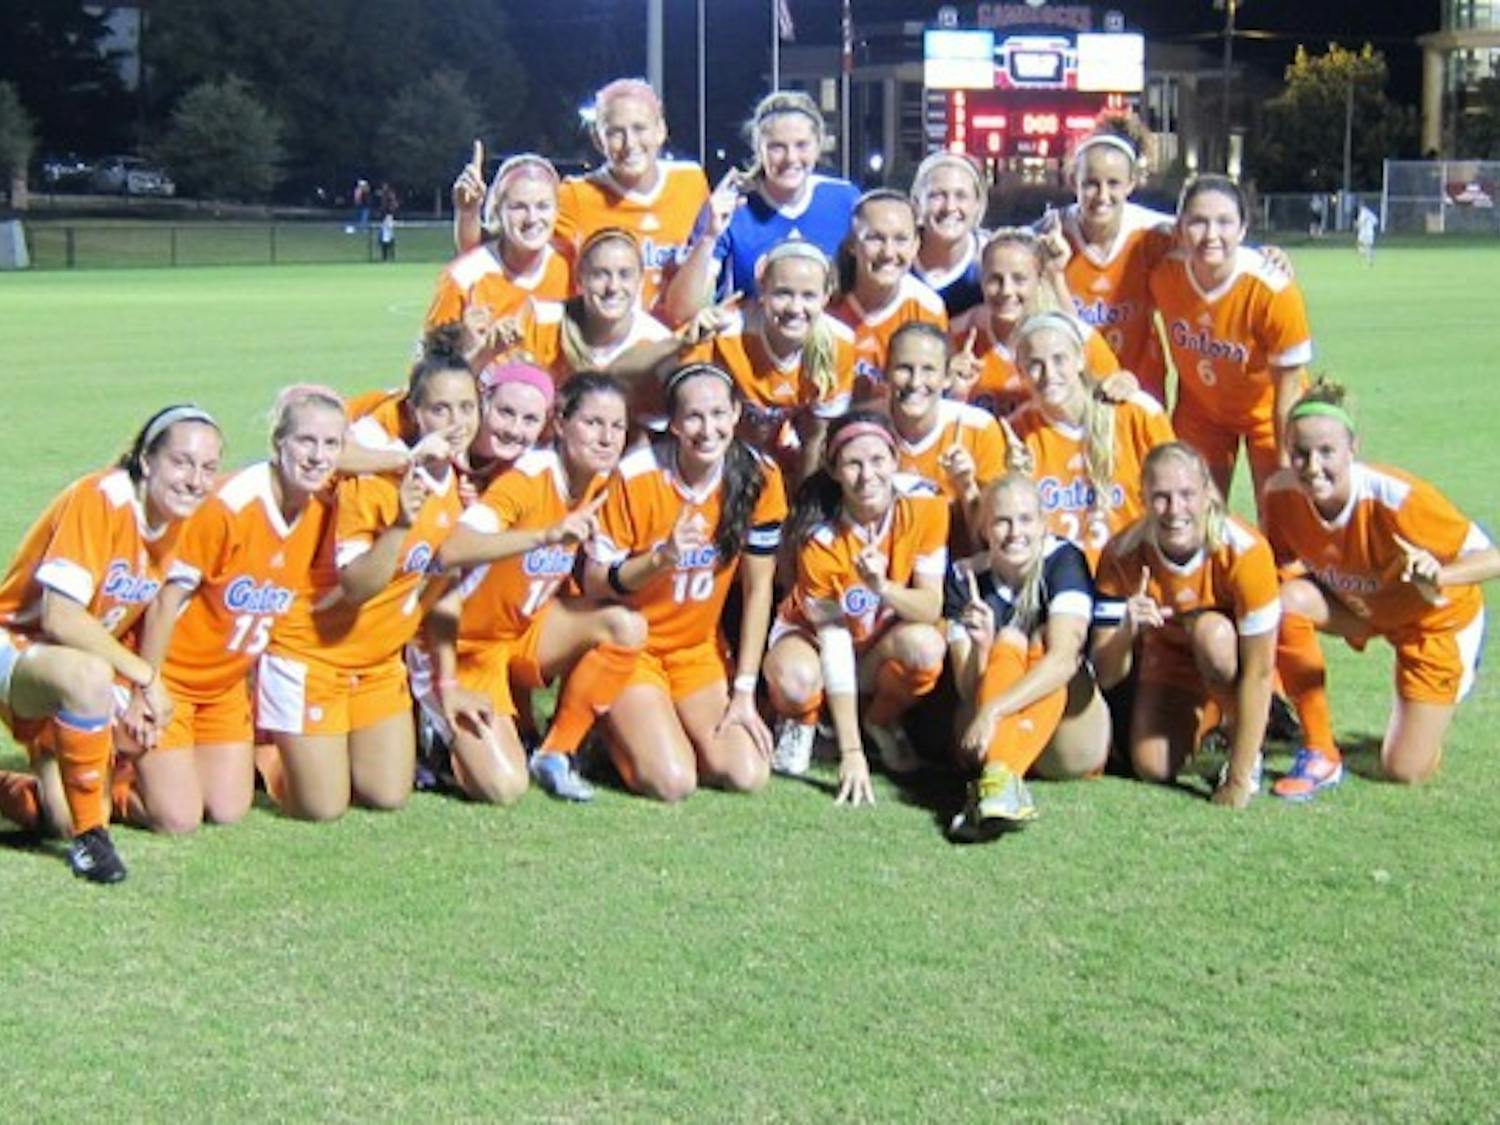 The Gators soccer team poses for a photograph following their 3-0 victory against South Carolina on Thursday in Columbia, S.C. UF clinched its second SEC championship in three years.